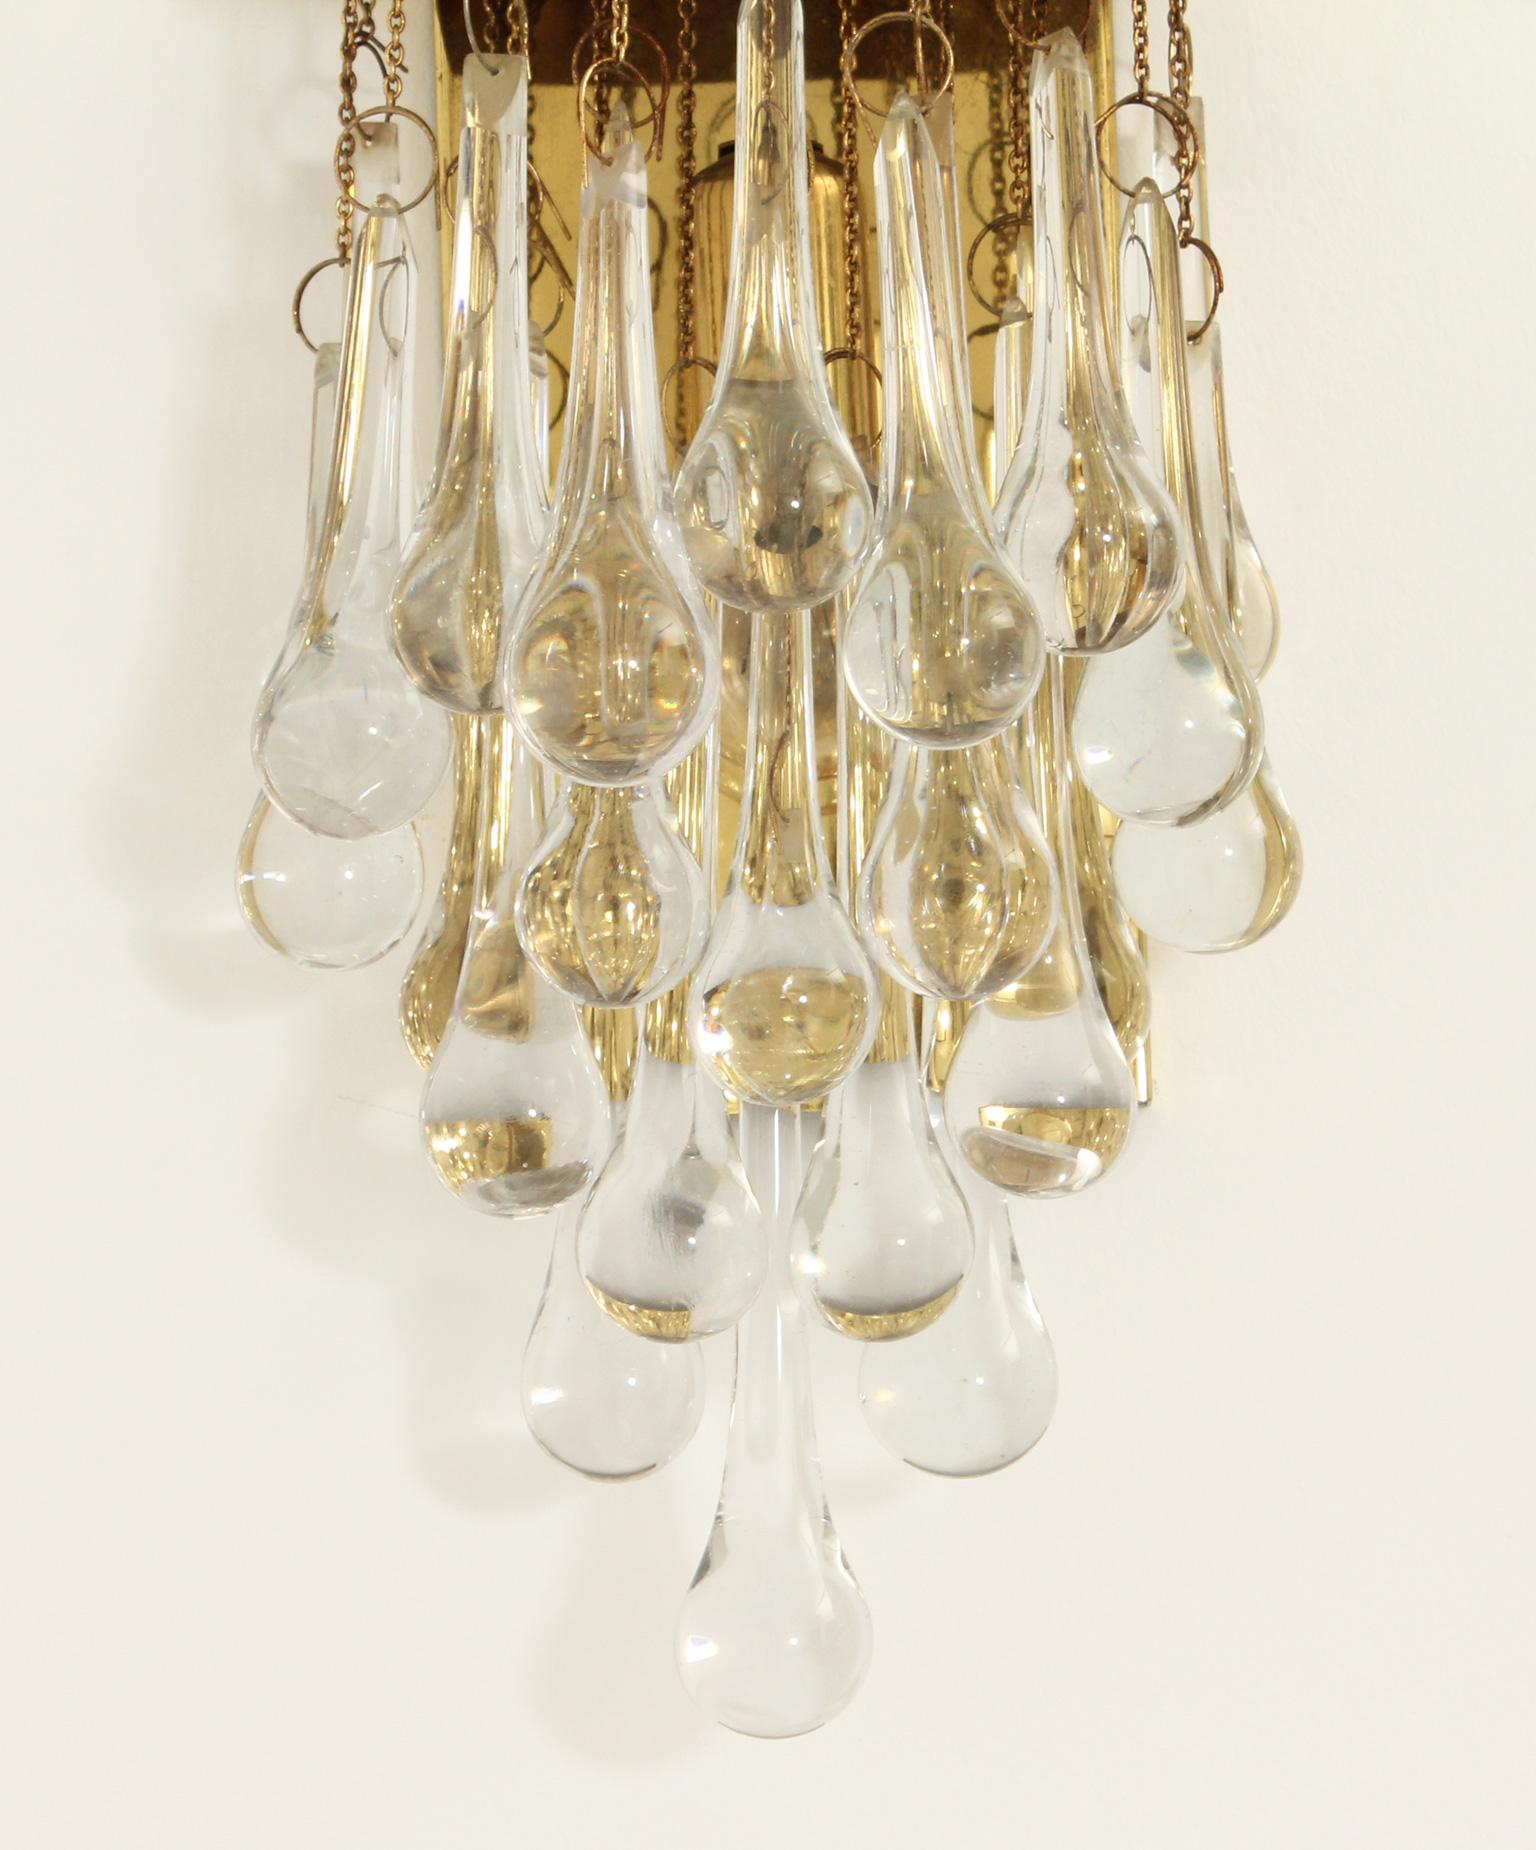 Spanish Pair of Brass and Glass Teardrop Sconces by Lumica, Spain, 1970's For Sale